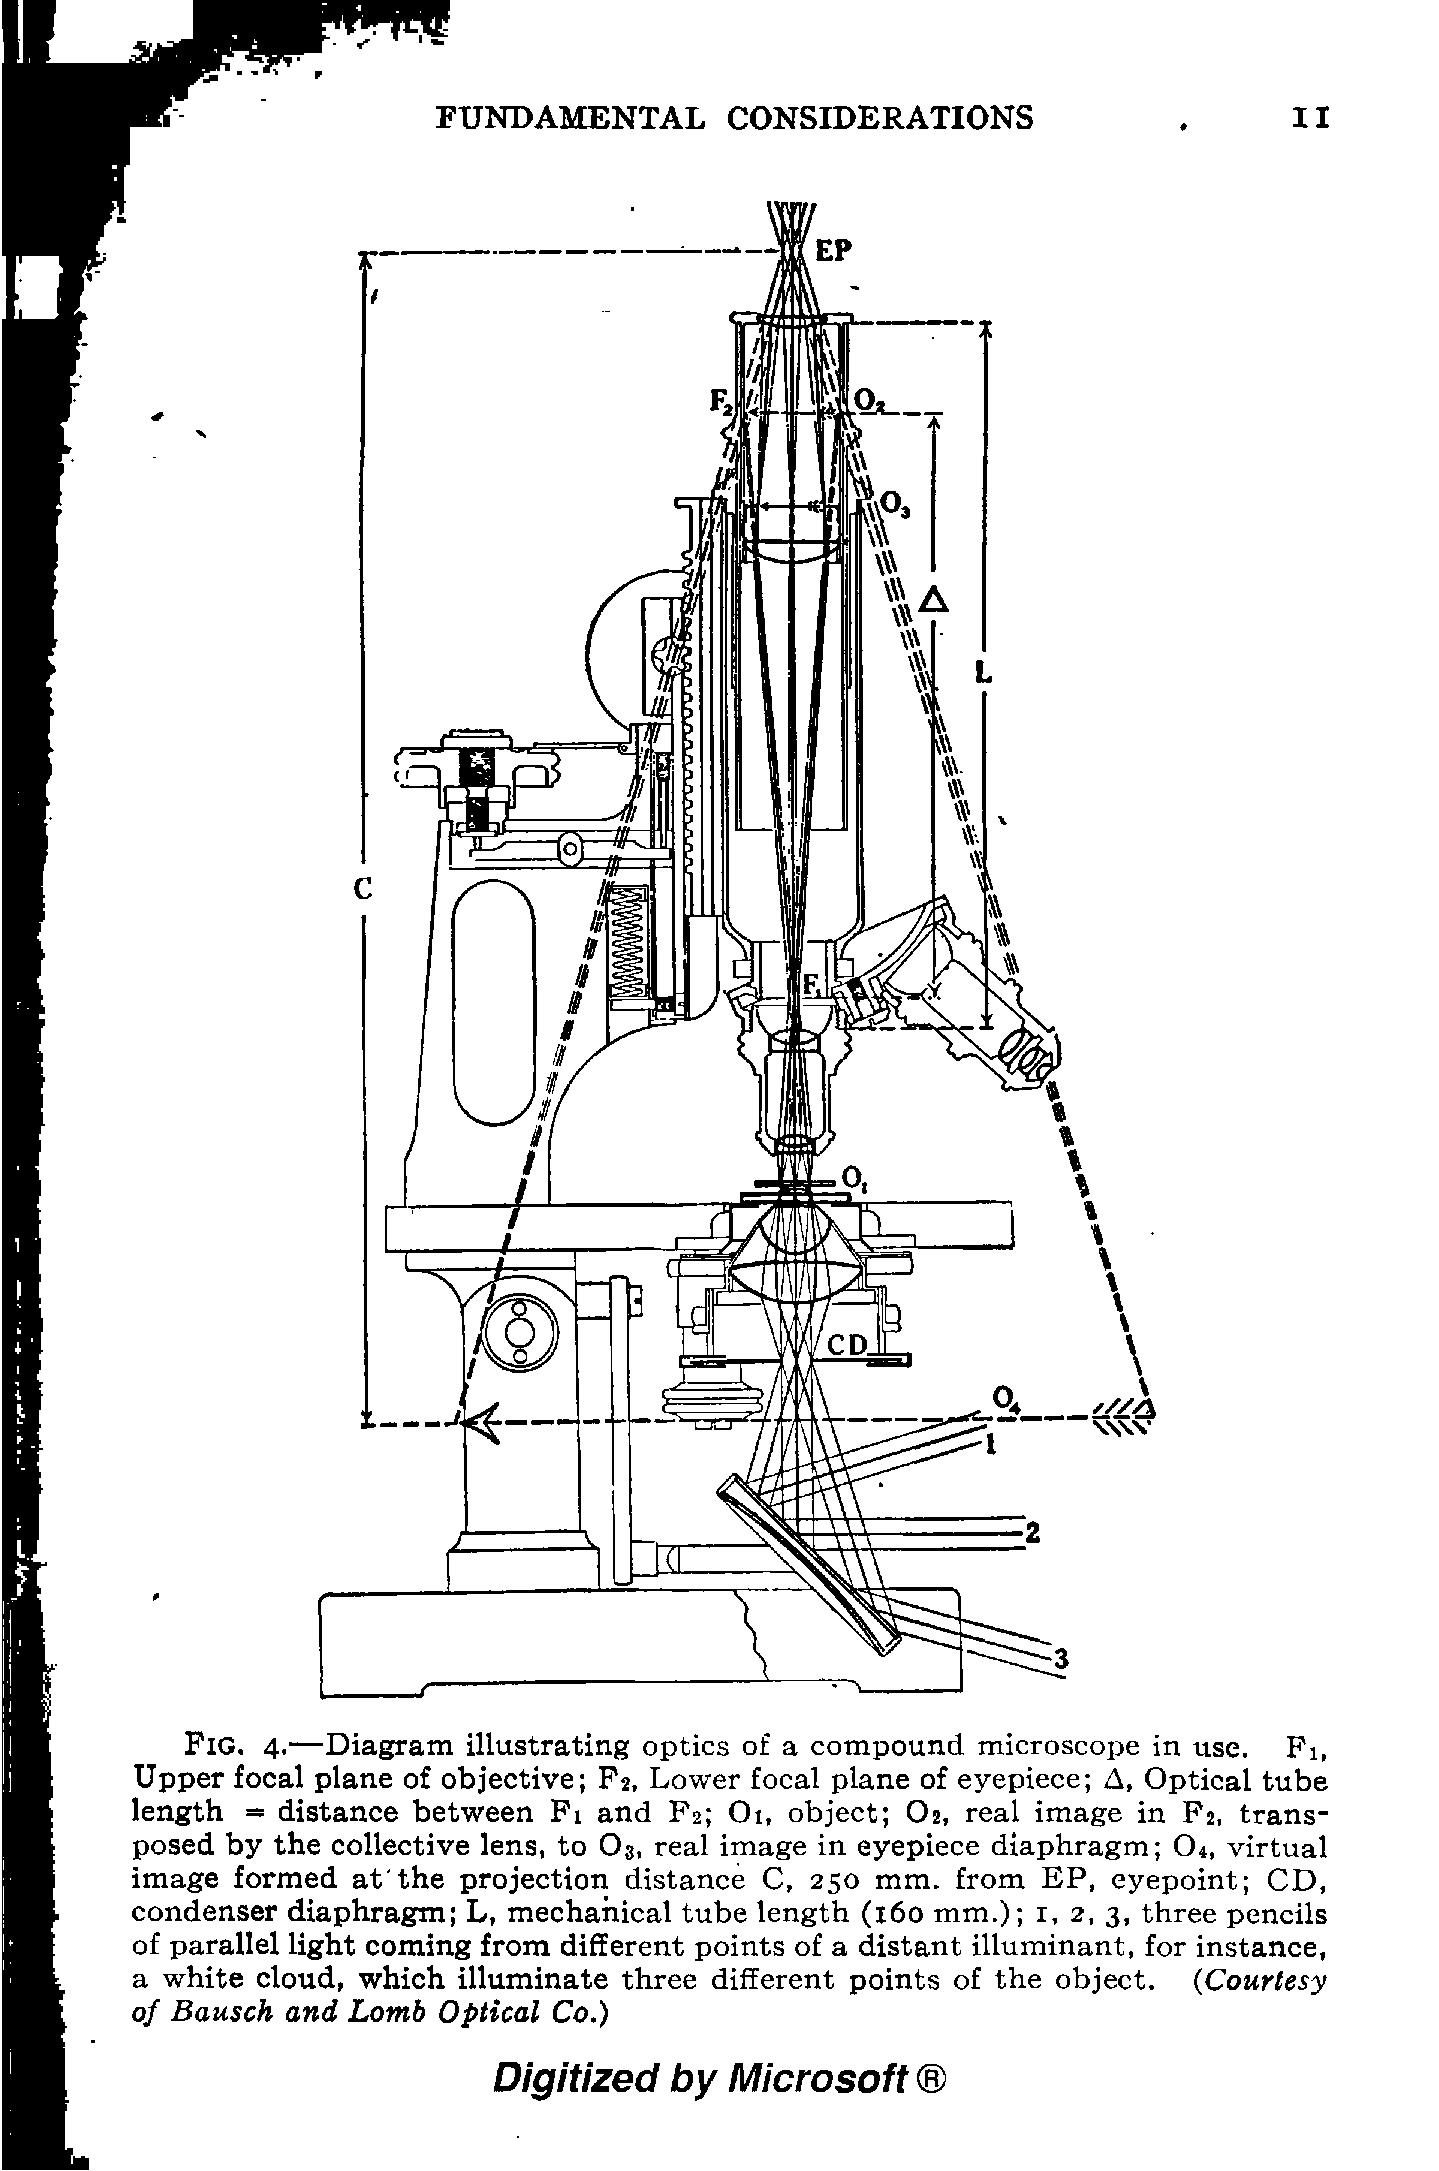 Fig. 4.—Diagram illustrating optics of a compound microscope in use. Pi, Upper focal plane of objective P2, Lower focal plane of eyepiece A, Optical tube length = distance between Fi and P2 Oi, object Os, real image in Pj, transposed by the eollective lens, to Oj, real image in eyepiece diaphragm O4, virtual image formed at the projection distance C, 250 mm. from EP, eyepoint CD, condenser diaphragm L, mechanical tube length (160 mm.) i, 2, 3, three pencils of parallel light coming from different points of a distant illuminant, for instance, a white cloud, which illuminate three different points of the object. (Courtesy of Bausch and Lomb Optical Co.)...